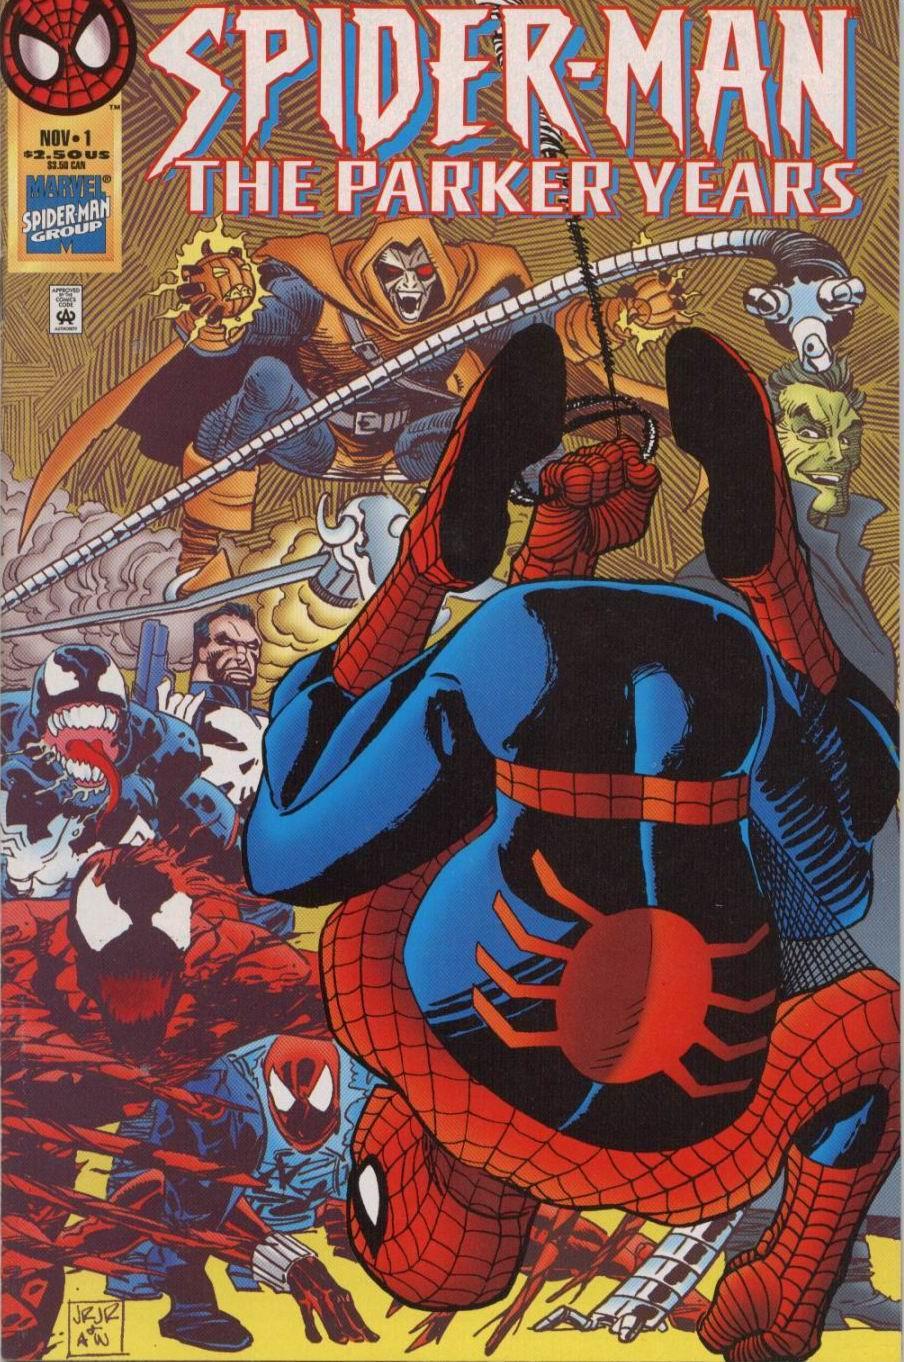 Spider-Man: The Parker Years Vol. 1 #1